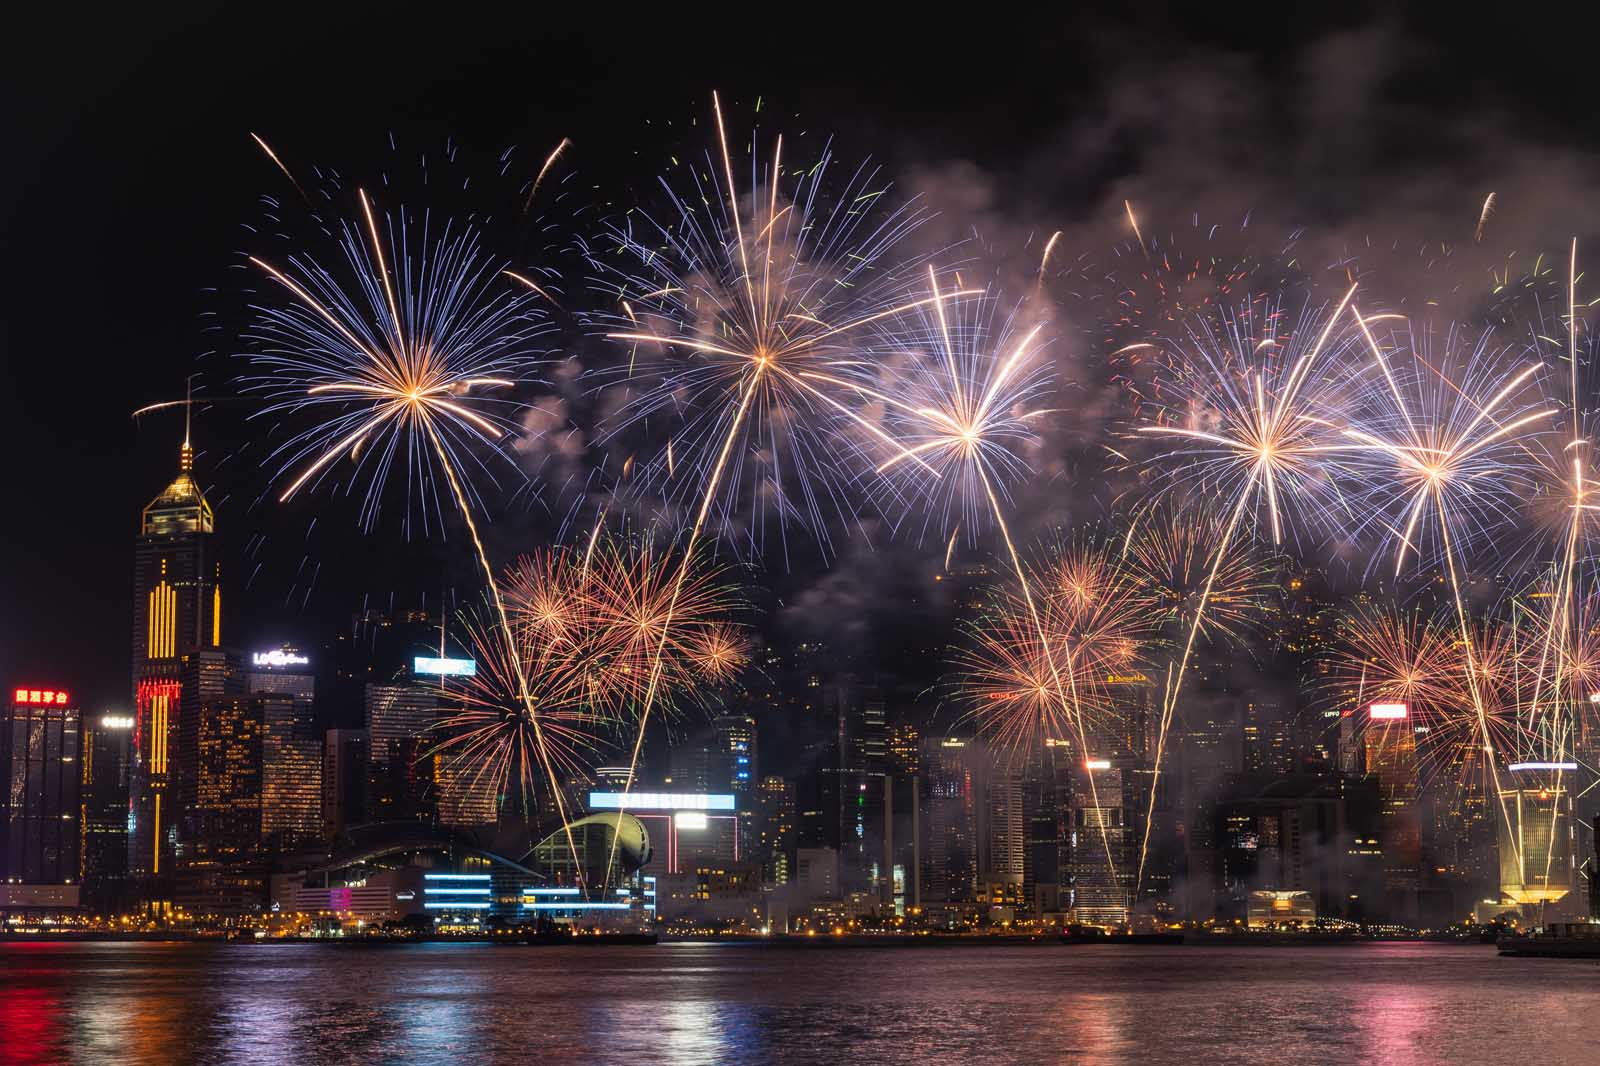 New Year's Traditions in Brazil